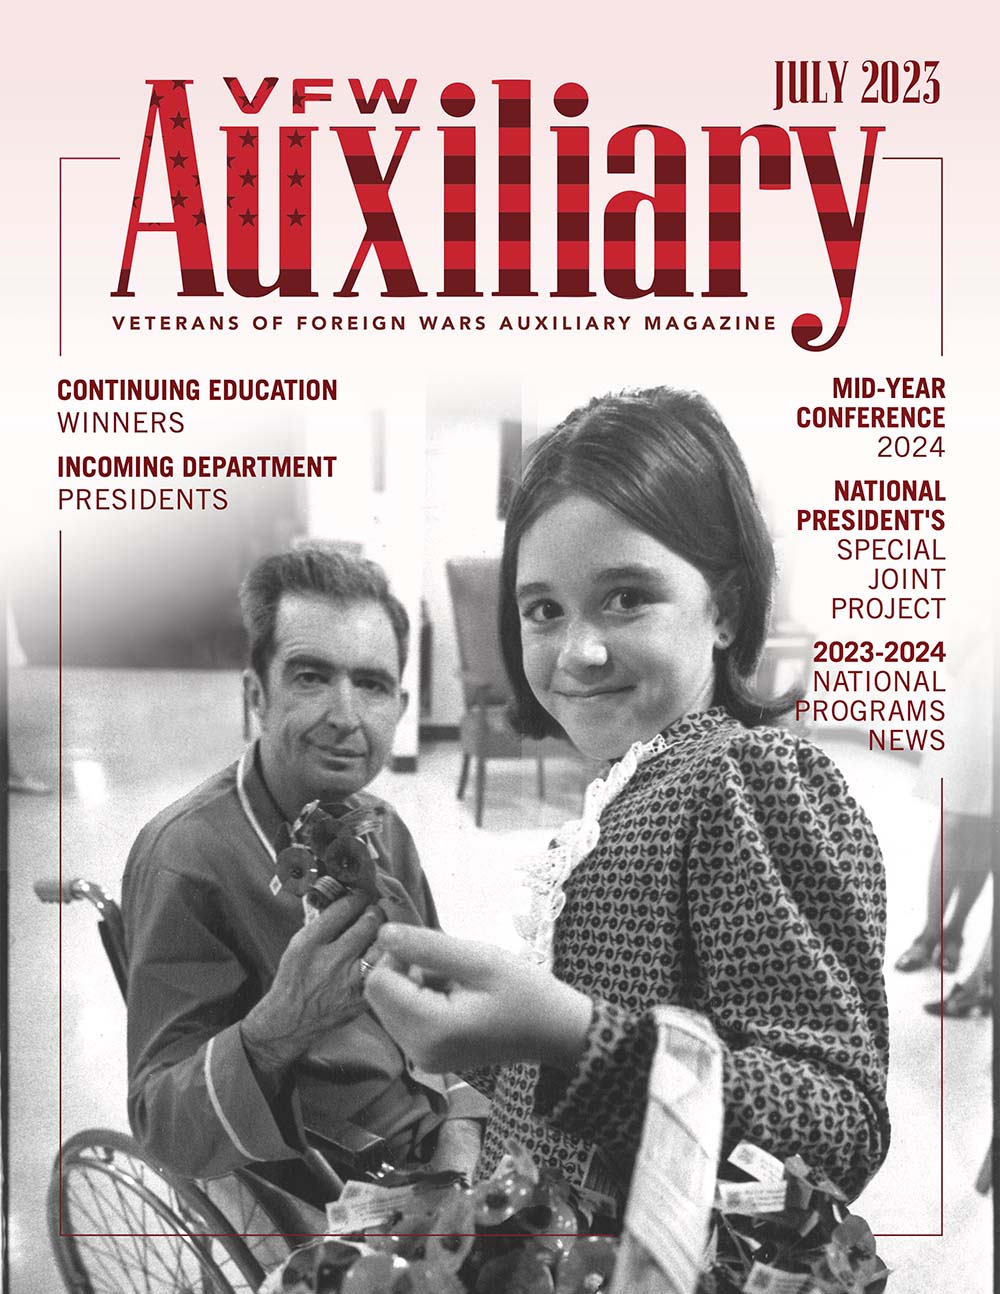 VFW Auxiliary Magazine, July 2023 cover.